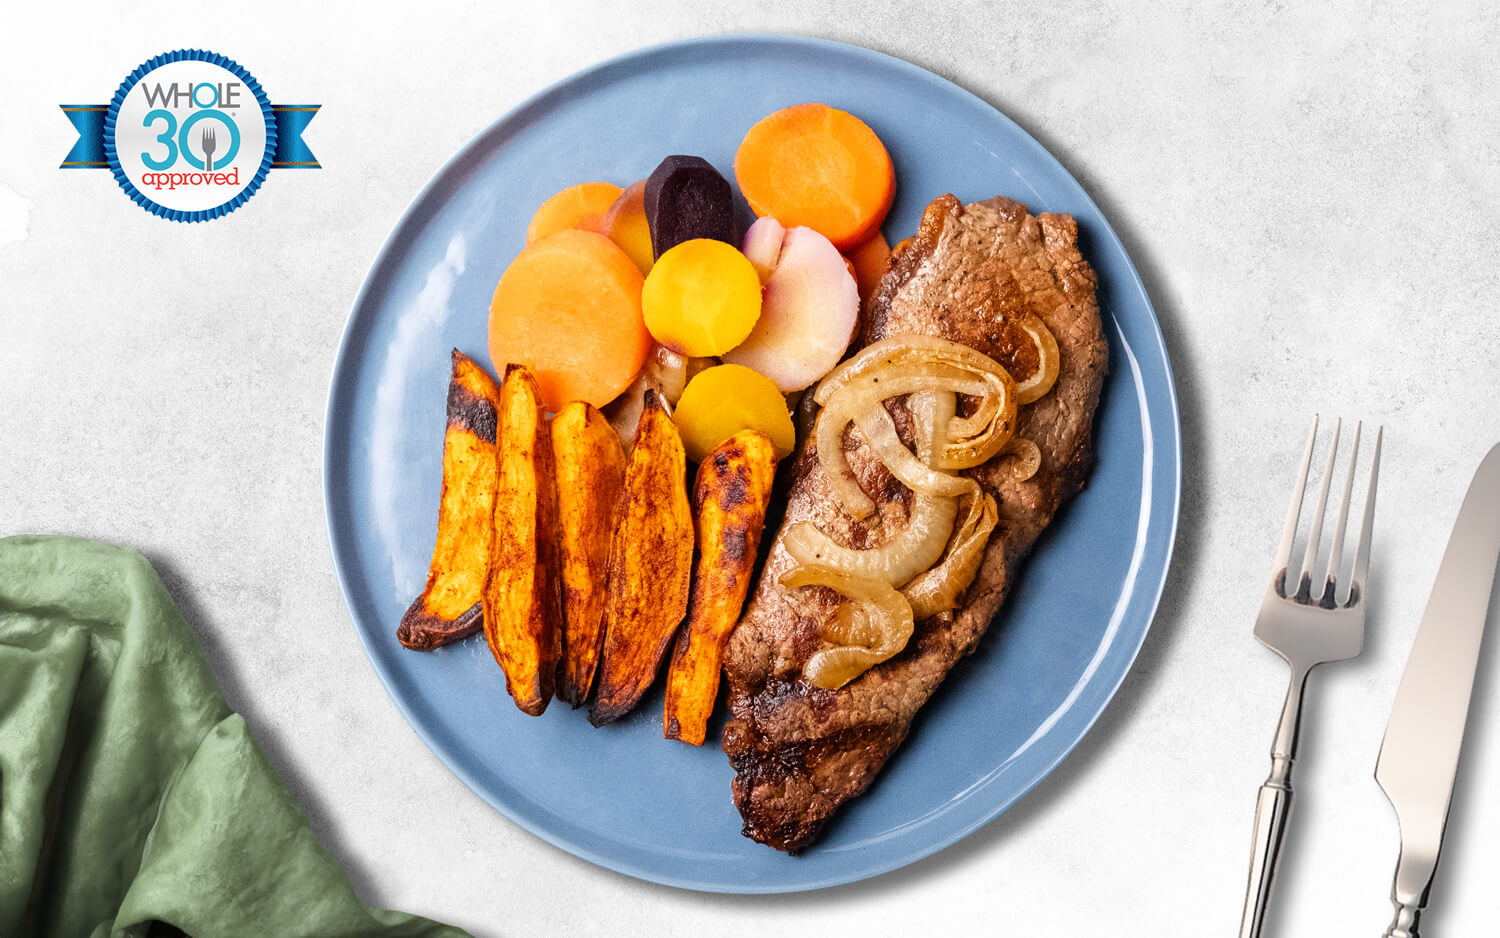 New York Strip Steak served with Sweet Potato Fries, Multi-Color Carrot Blend and Caramelized Onions.